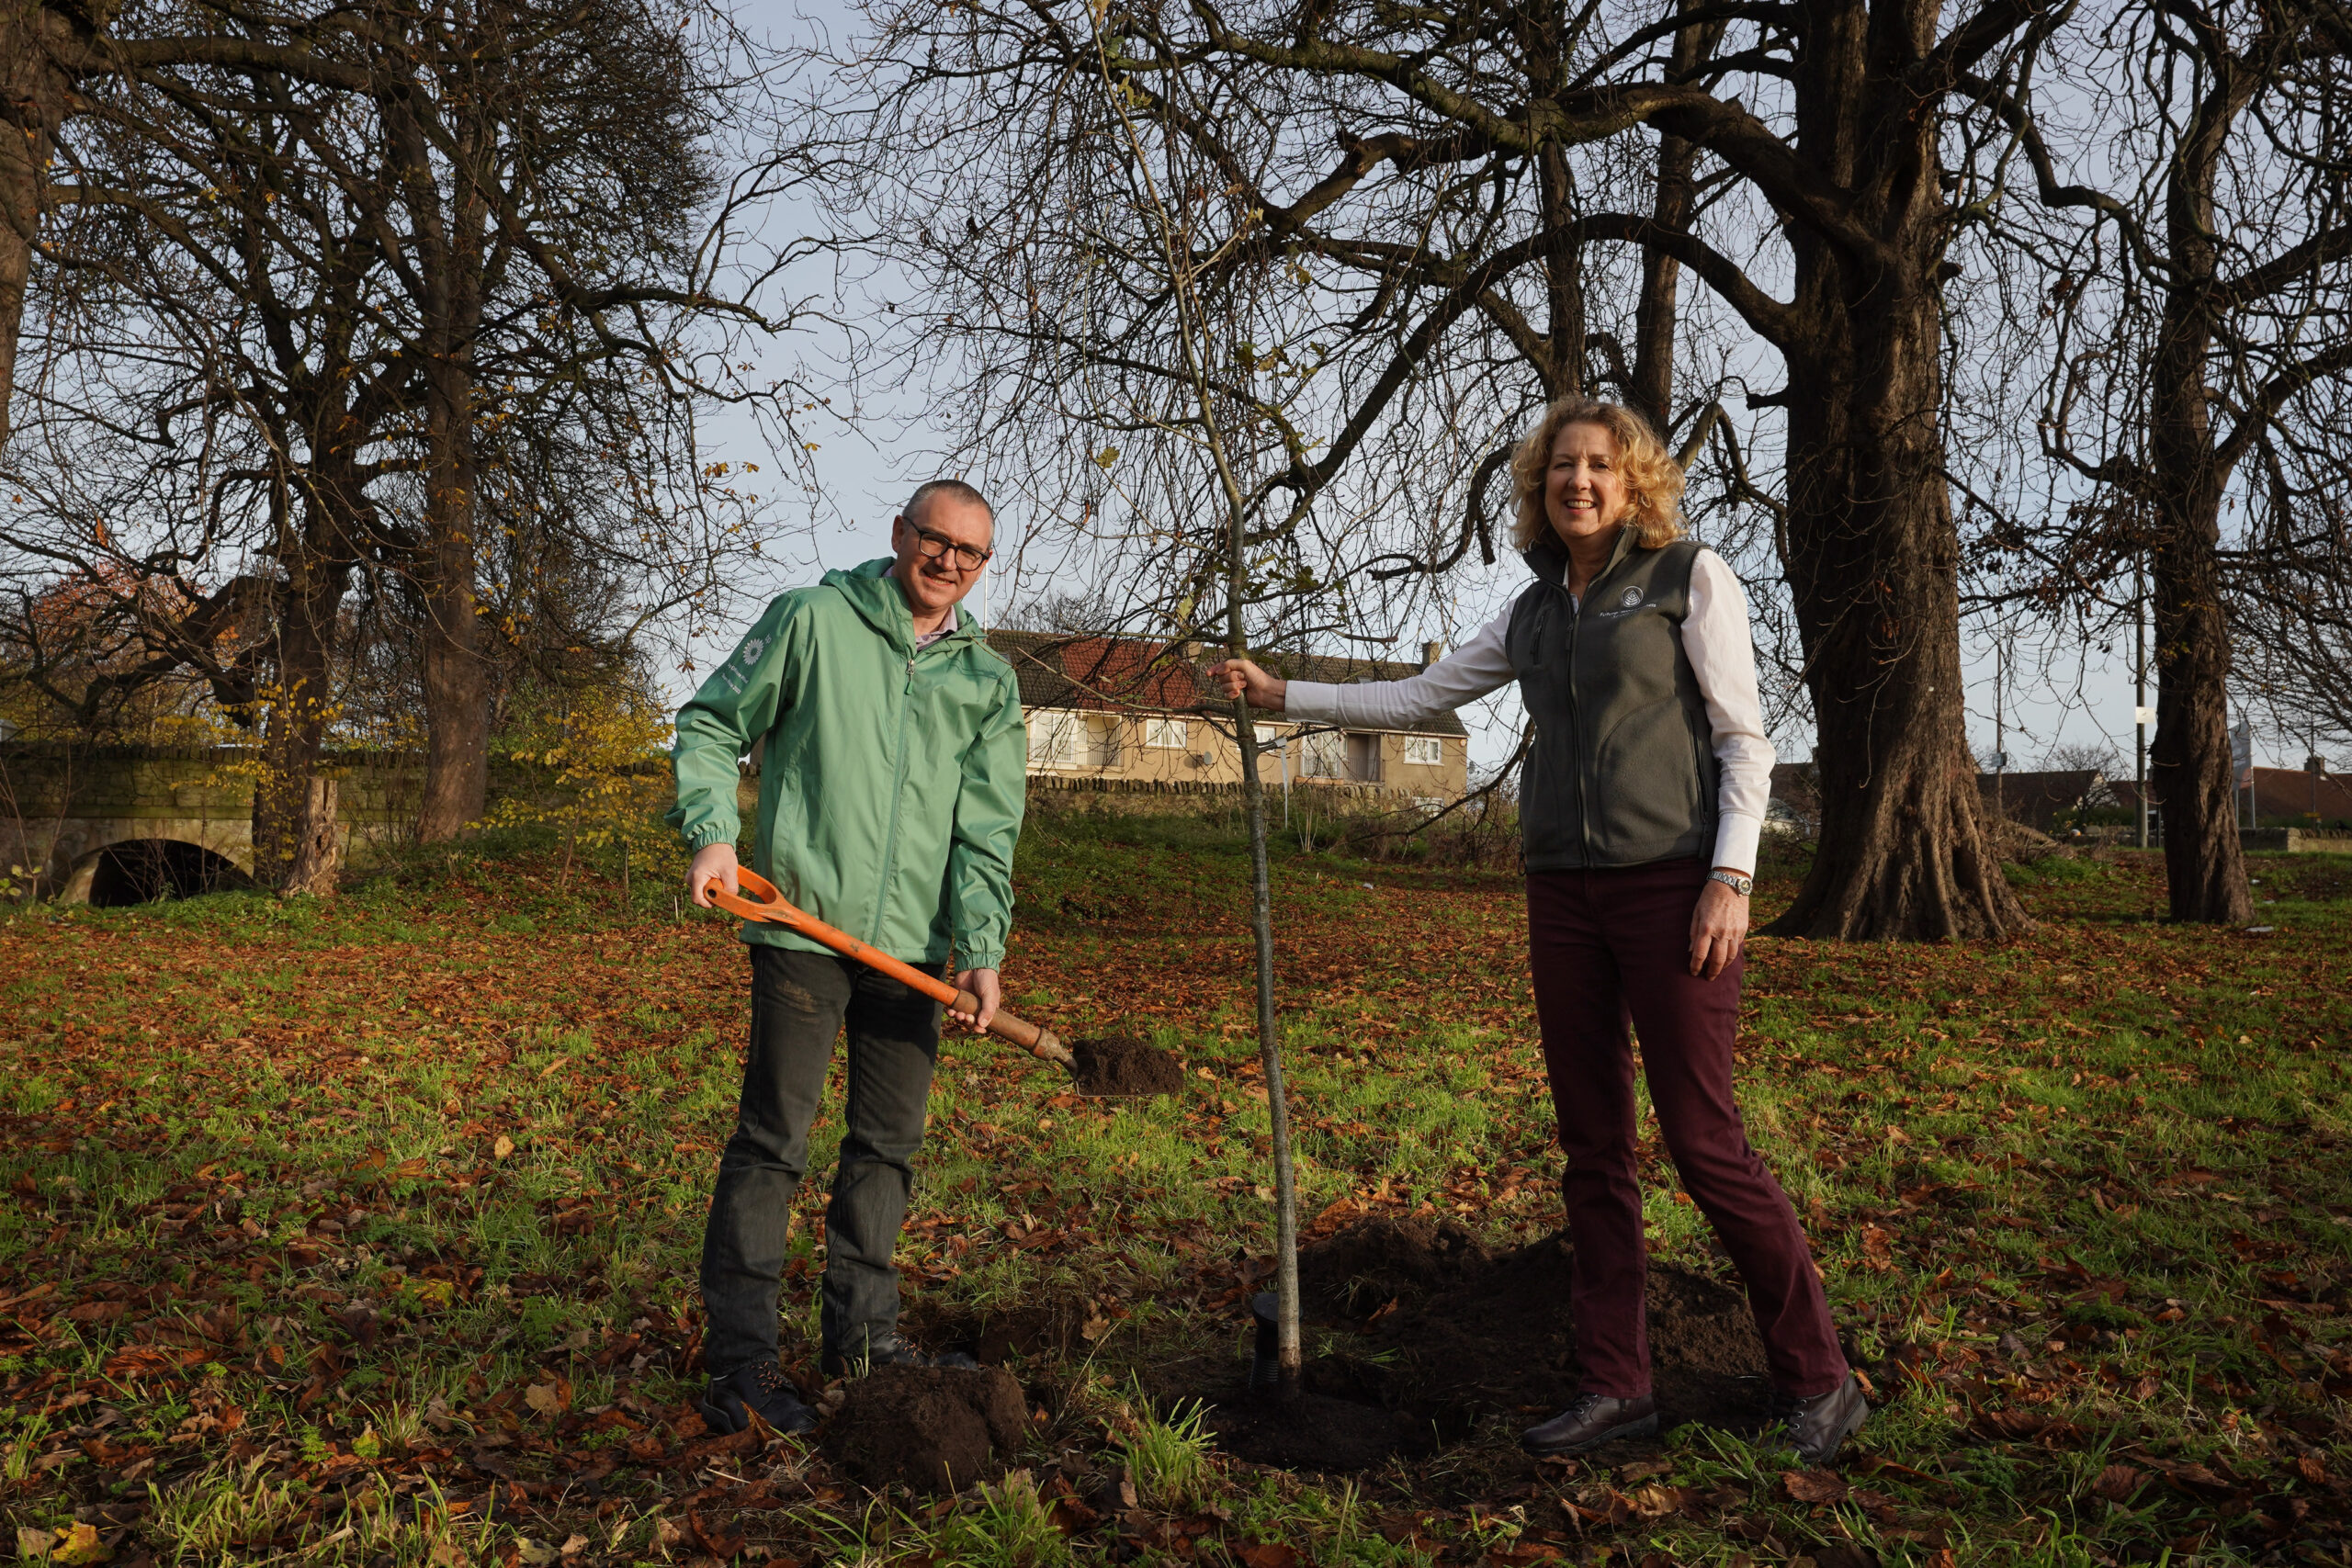 MEMBER NEWS: Future Woodlands Scotland partners with bp for urban forestry programme